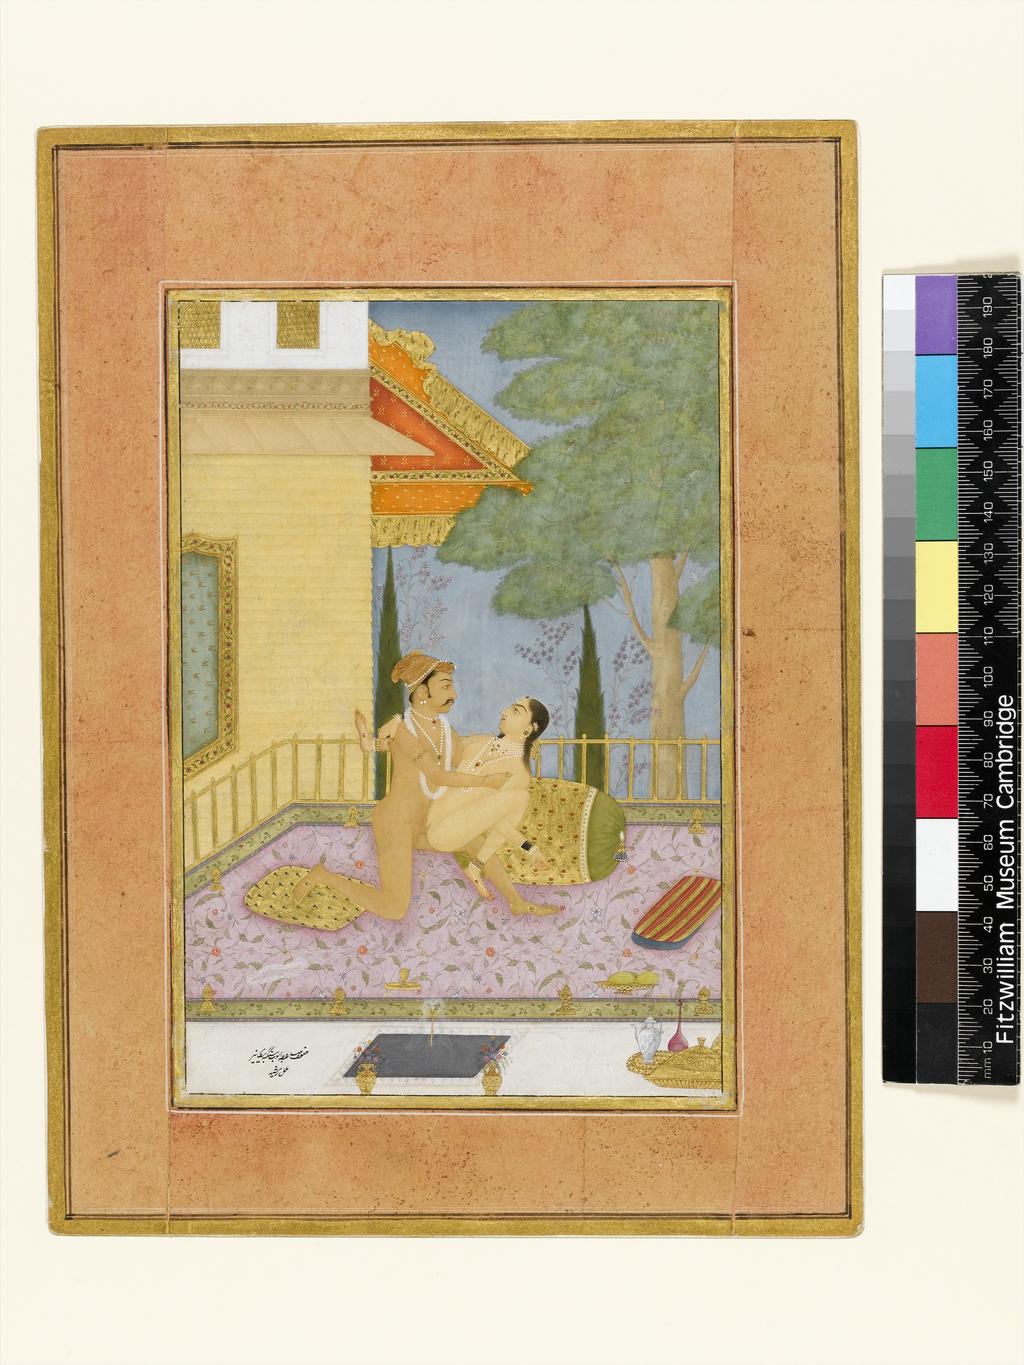 An image of The private pleasure of Maharaja Anup Singh of Bikaner by Rashid. Bodycolour including white, pen and ink with gold on paper, height 195mm, width 132mm, circa 1678.